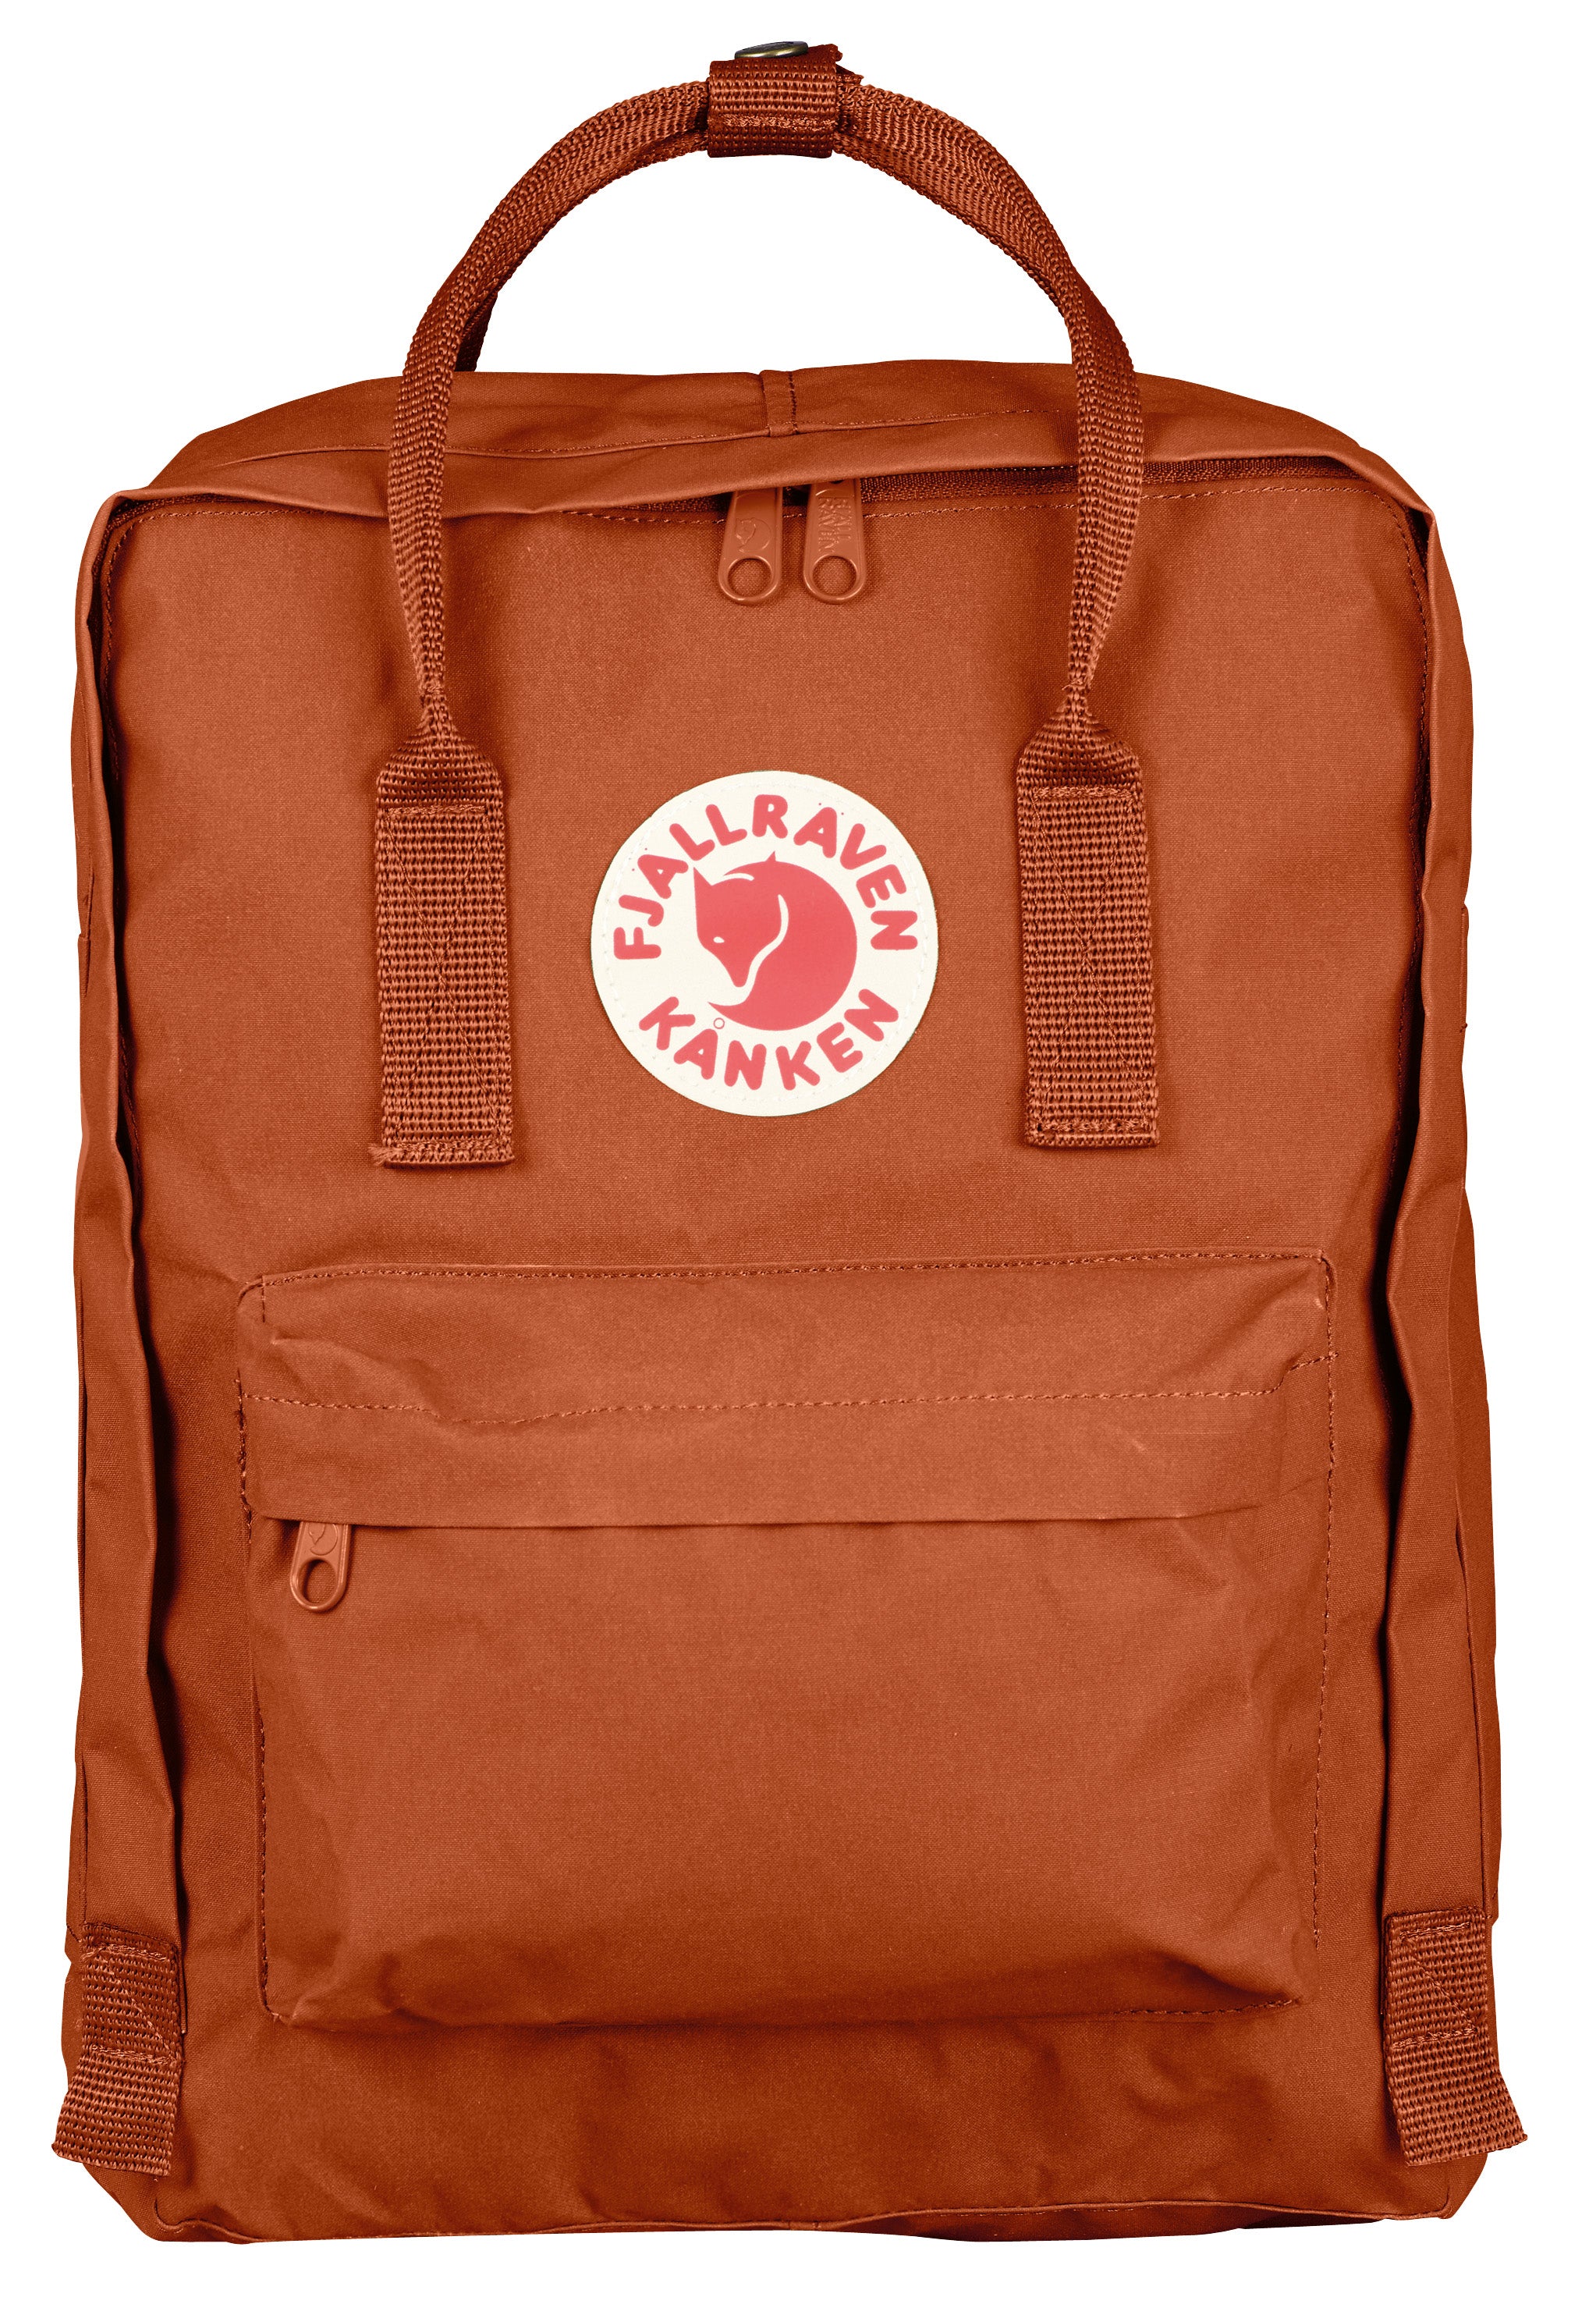 Fjallraven Classic Backpack - with the Arctic logo – Lifesbetteroutdoors